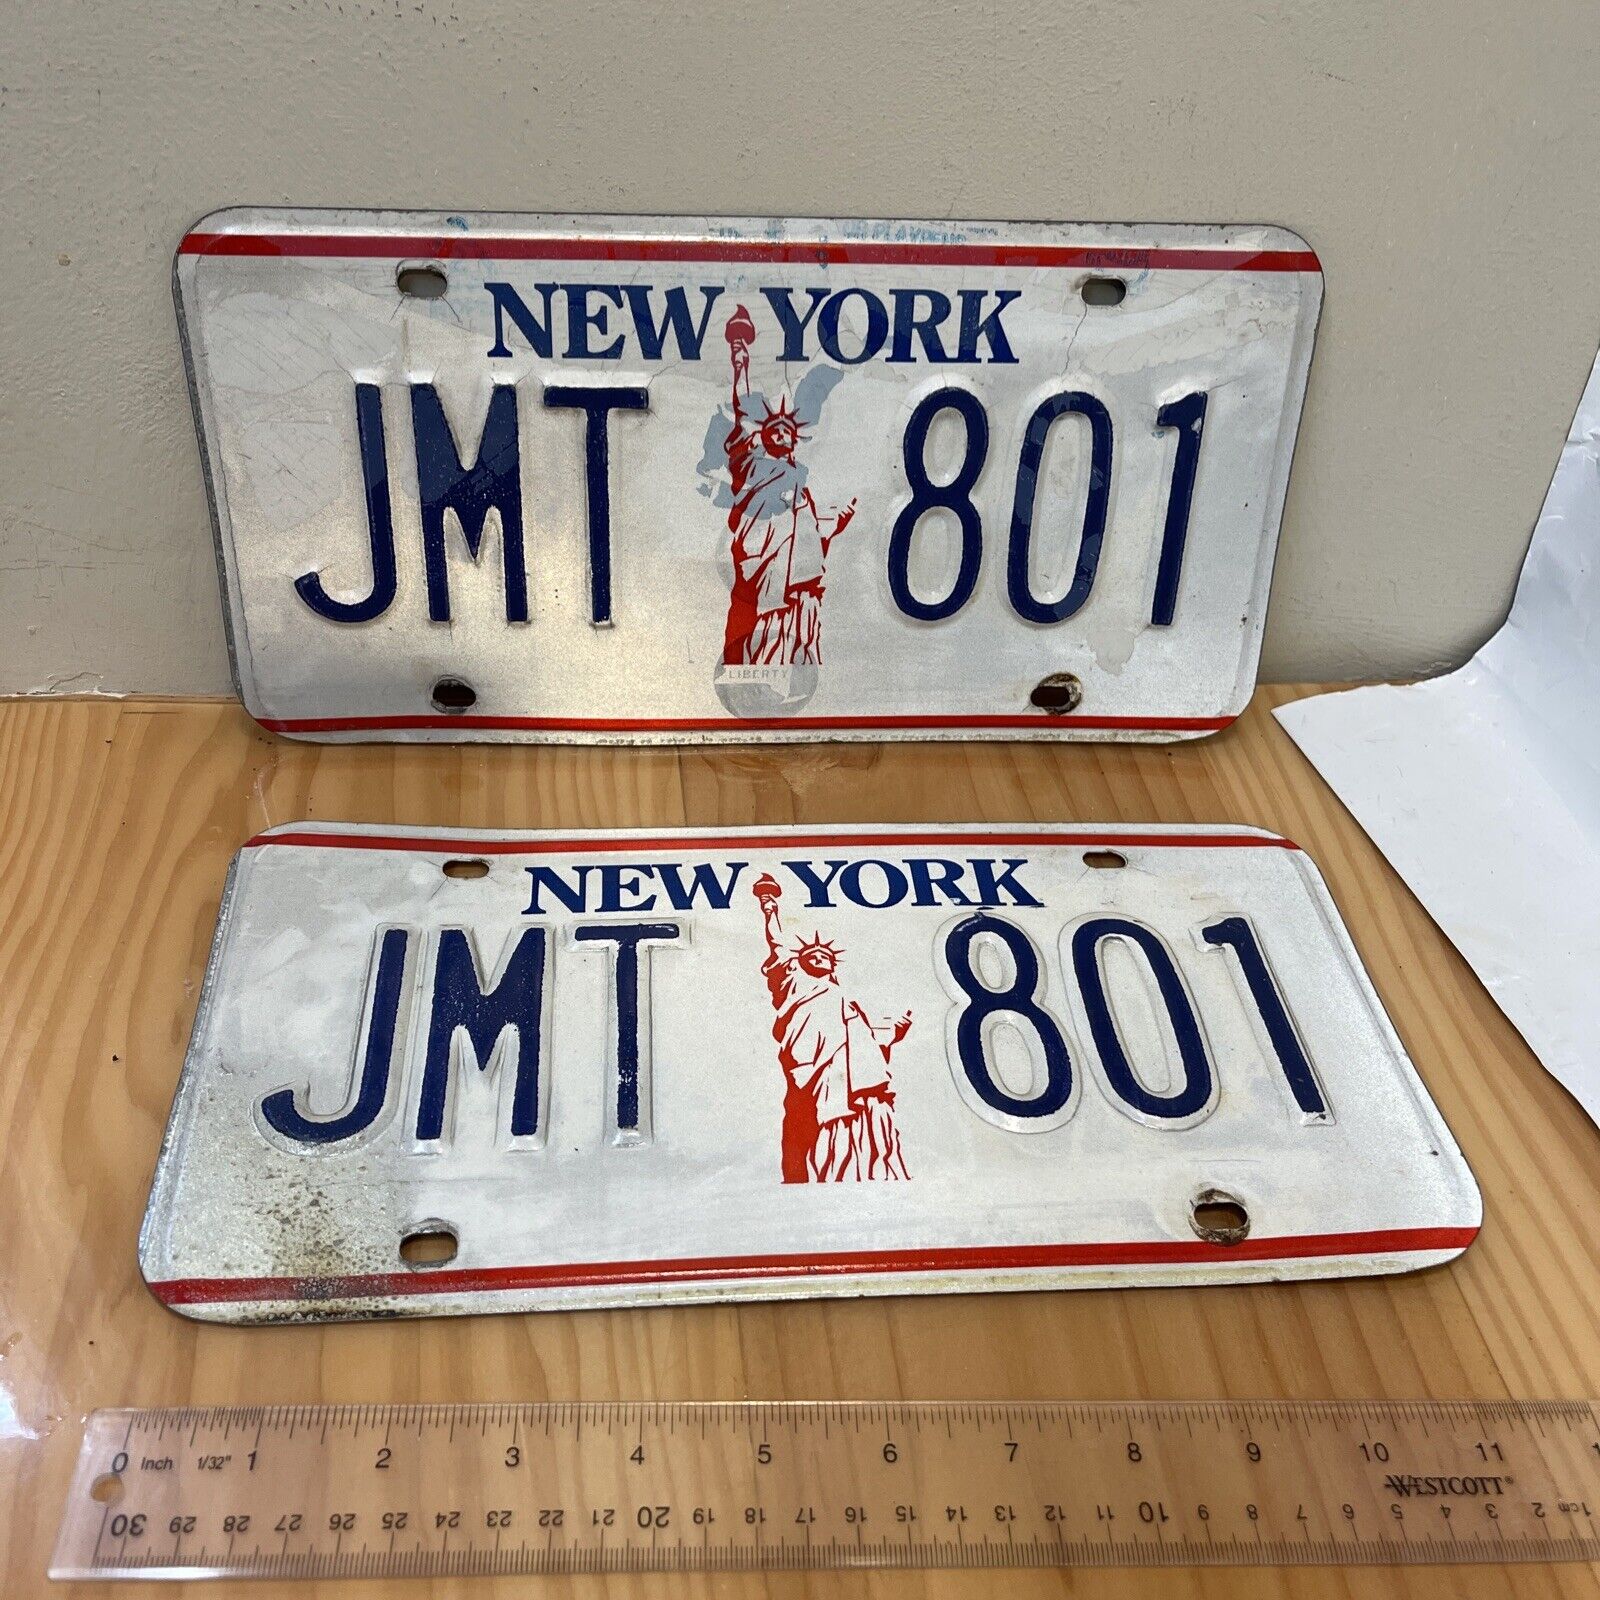 New York License Plates  from the 90’s PAIR JMT 801